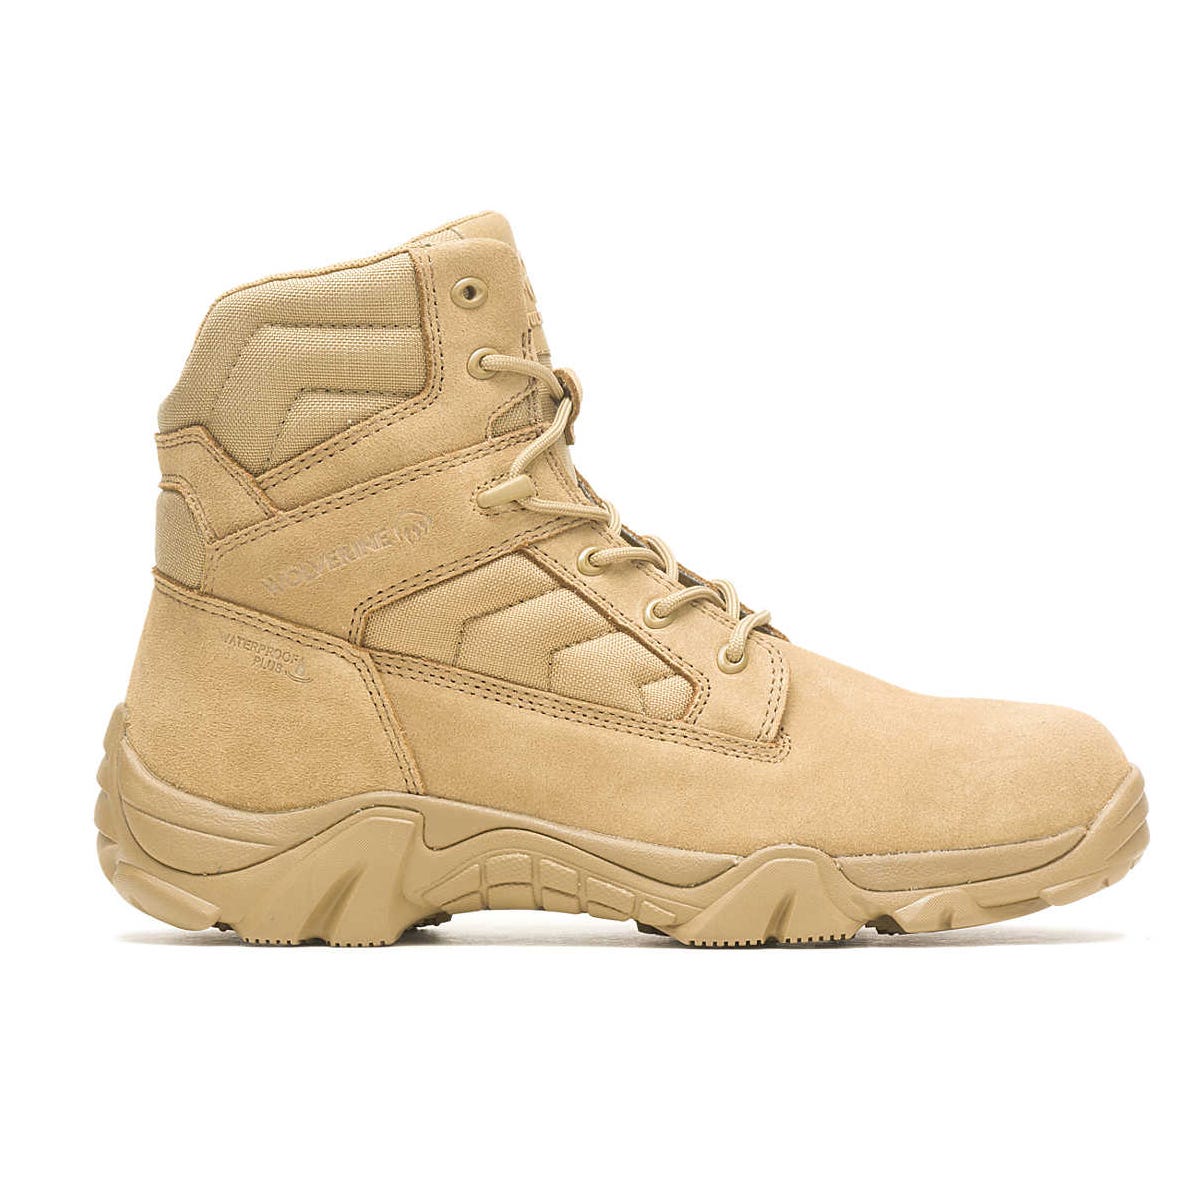 Tan tactical boots with a high-top design, lace-up front, and rugged outsole, featuring the Wolverine brand name embossed on the side.